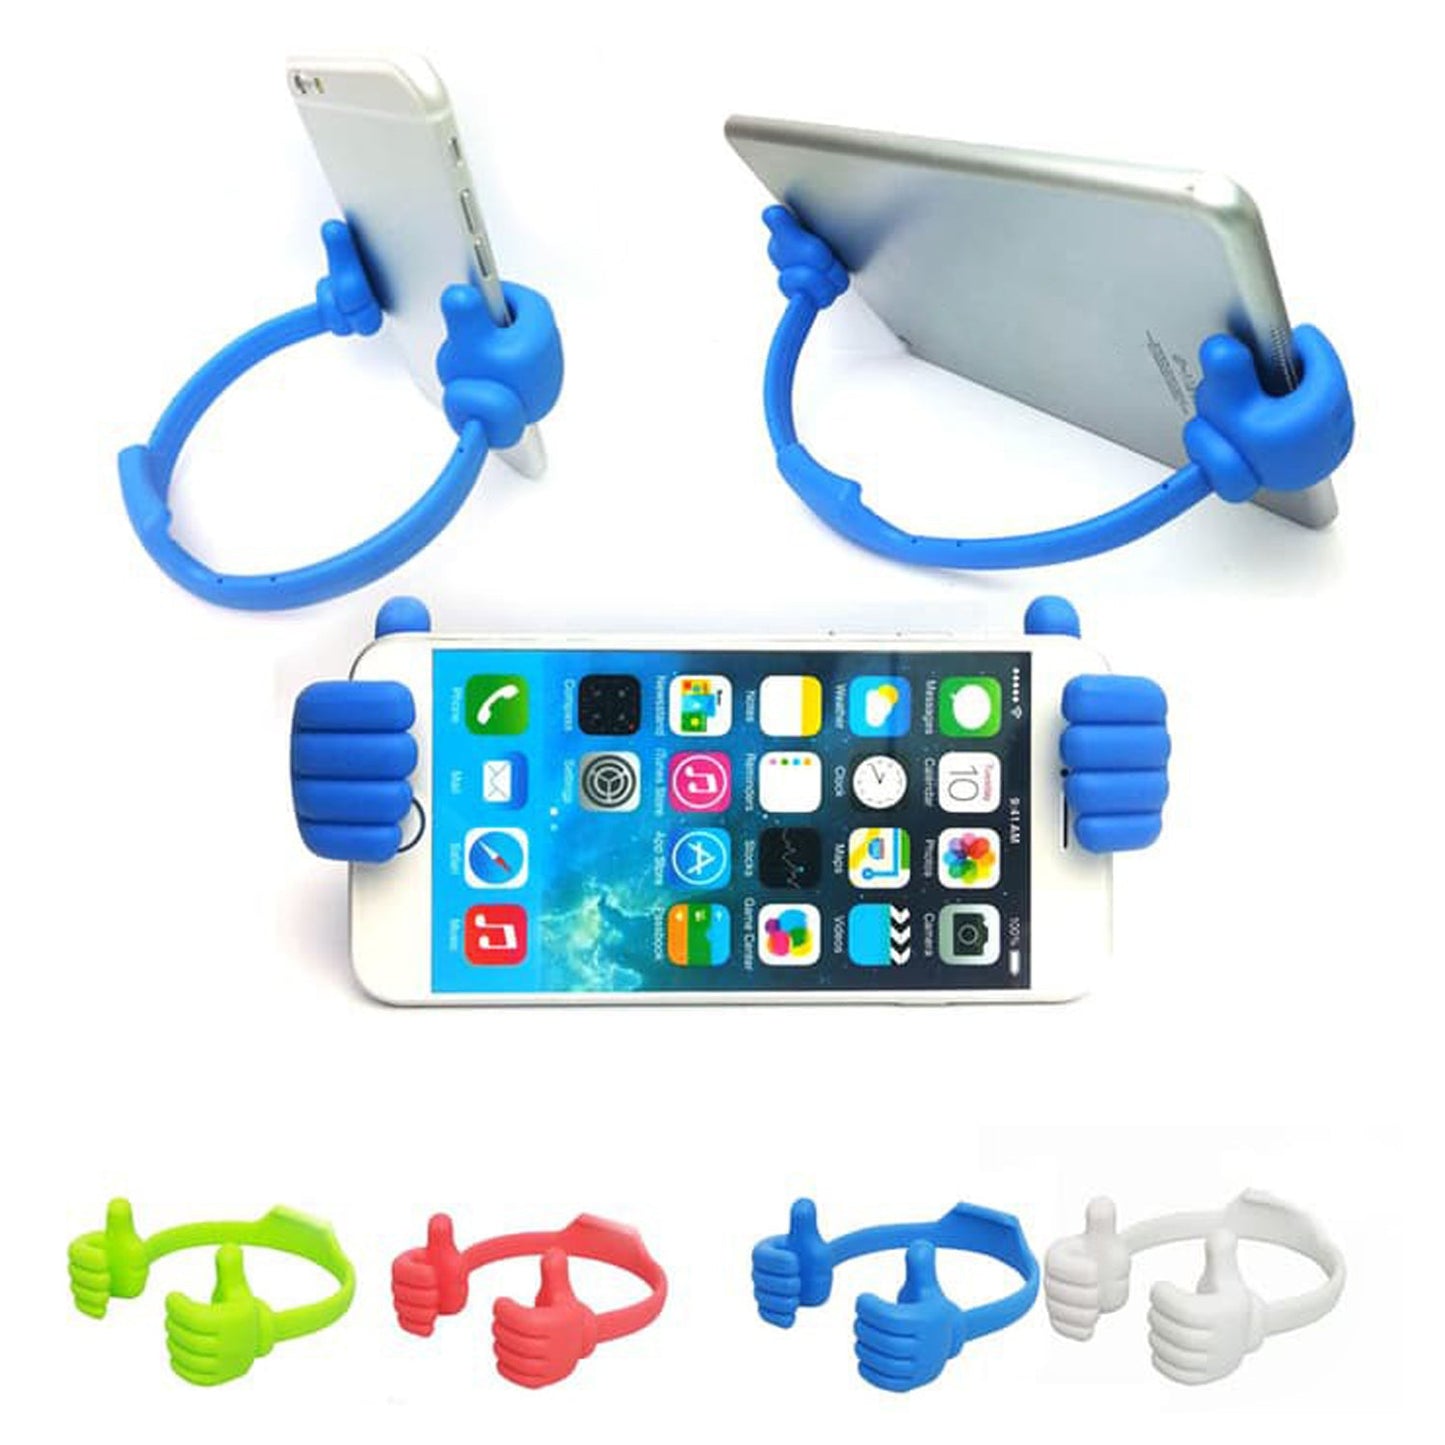 4 Pc Hand Shape Mobile Stand as a mobile supporting stand